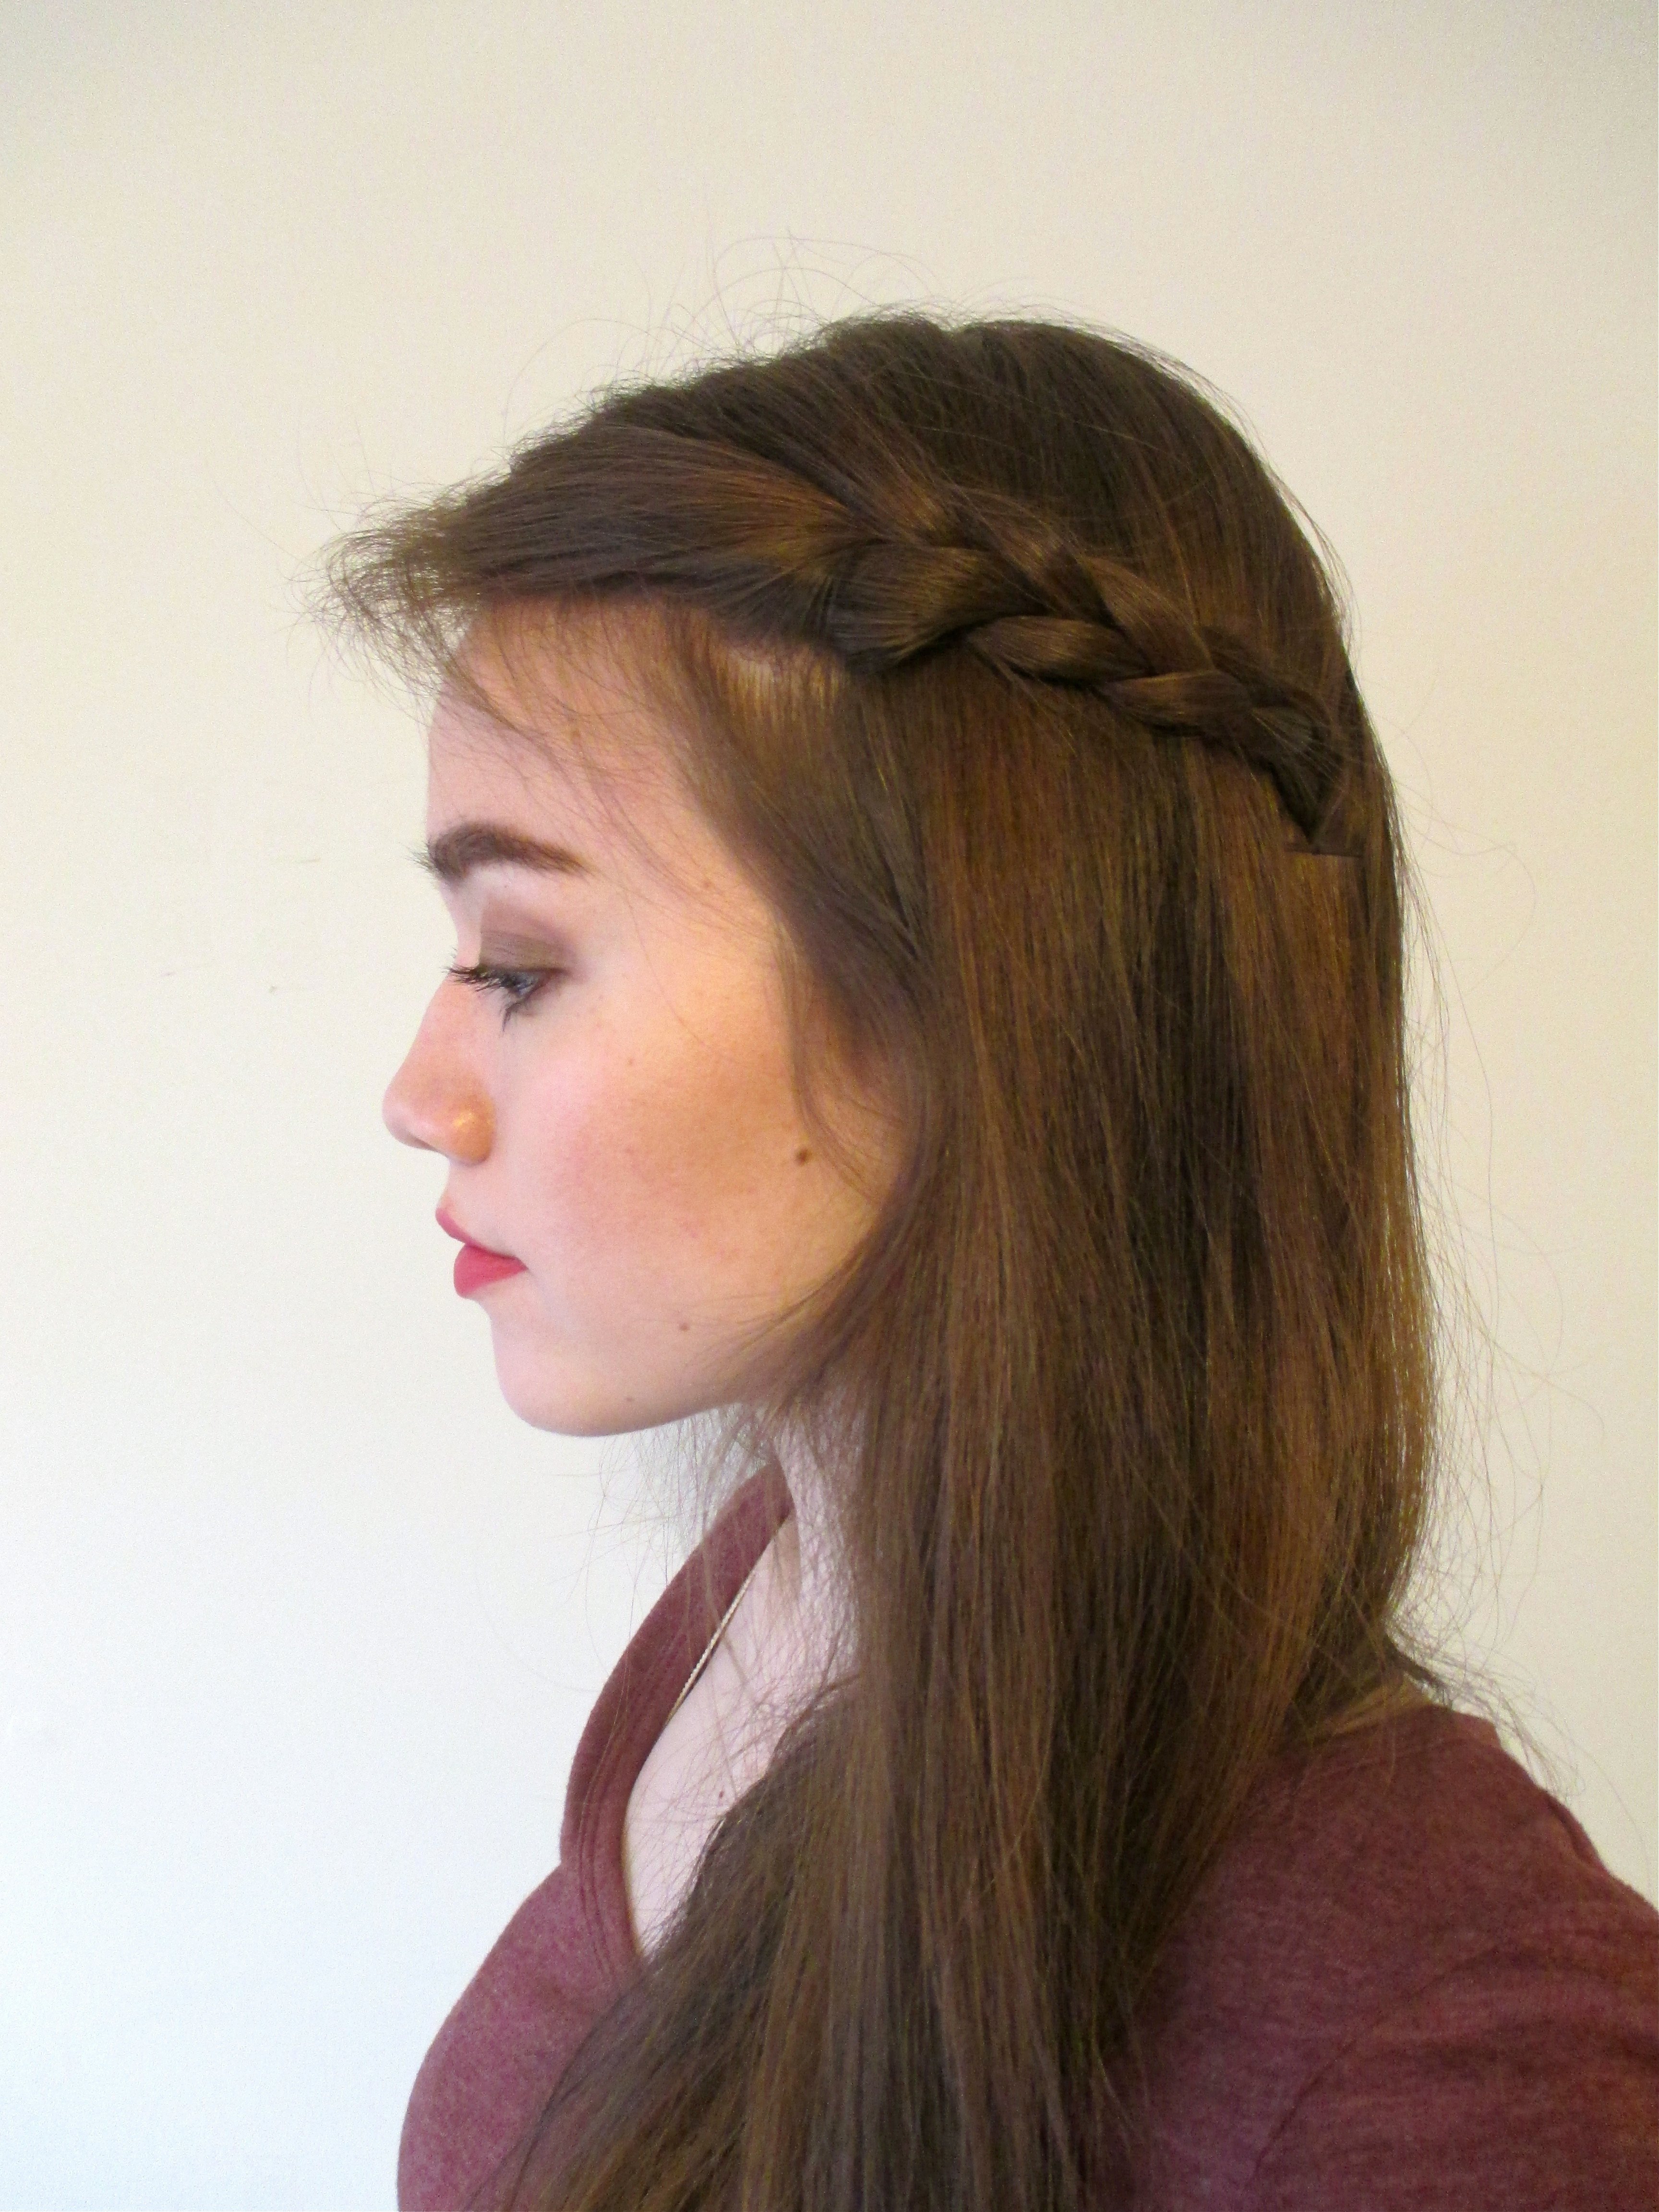 5 Cute And Easy Bobby Pin Hairstyles Using Fewer Than 5